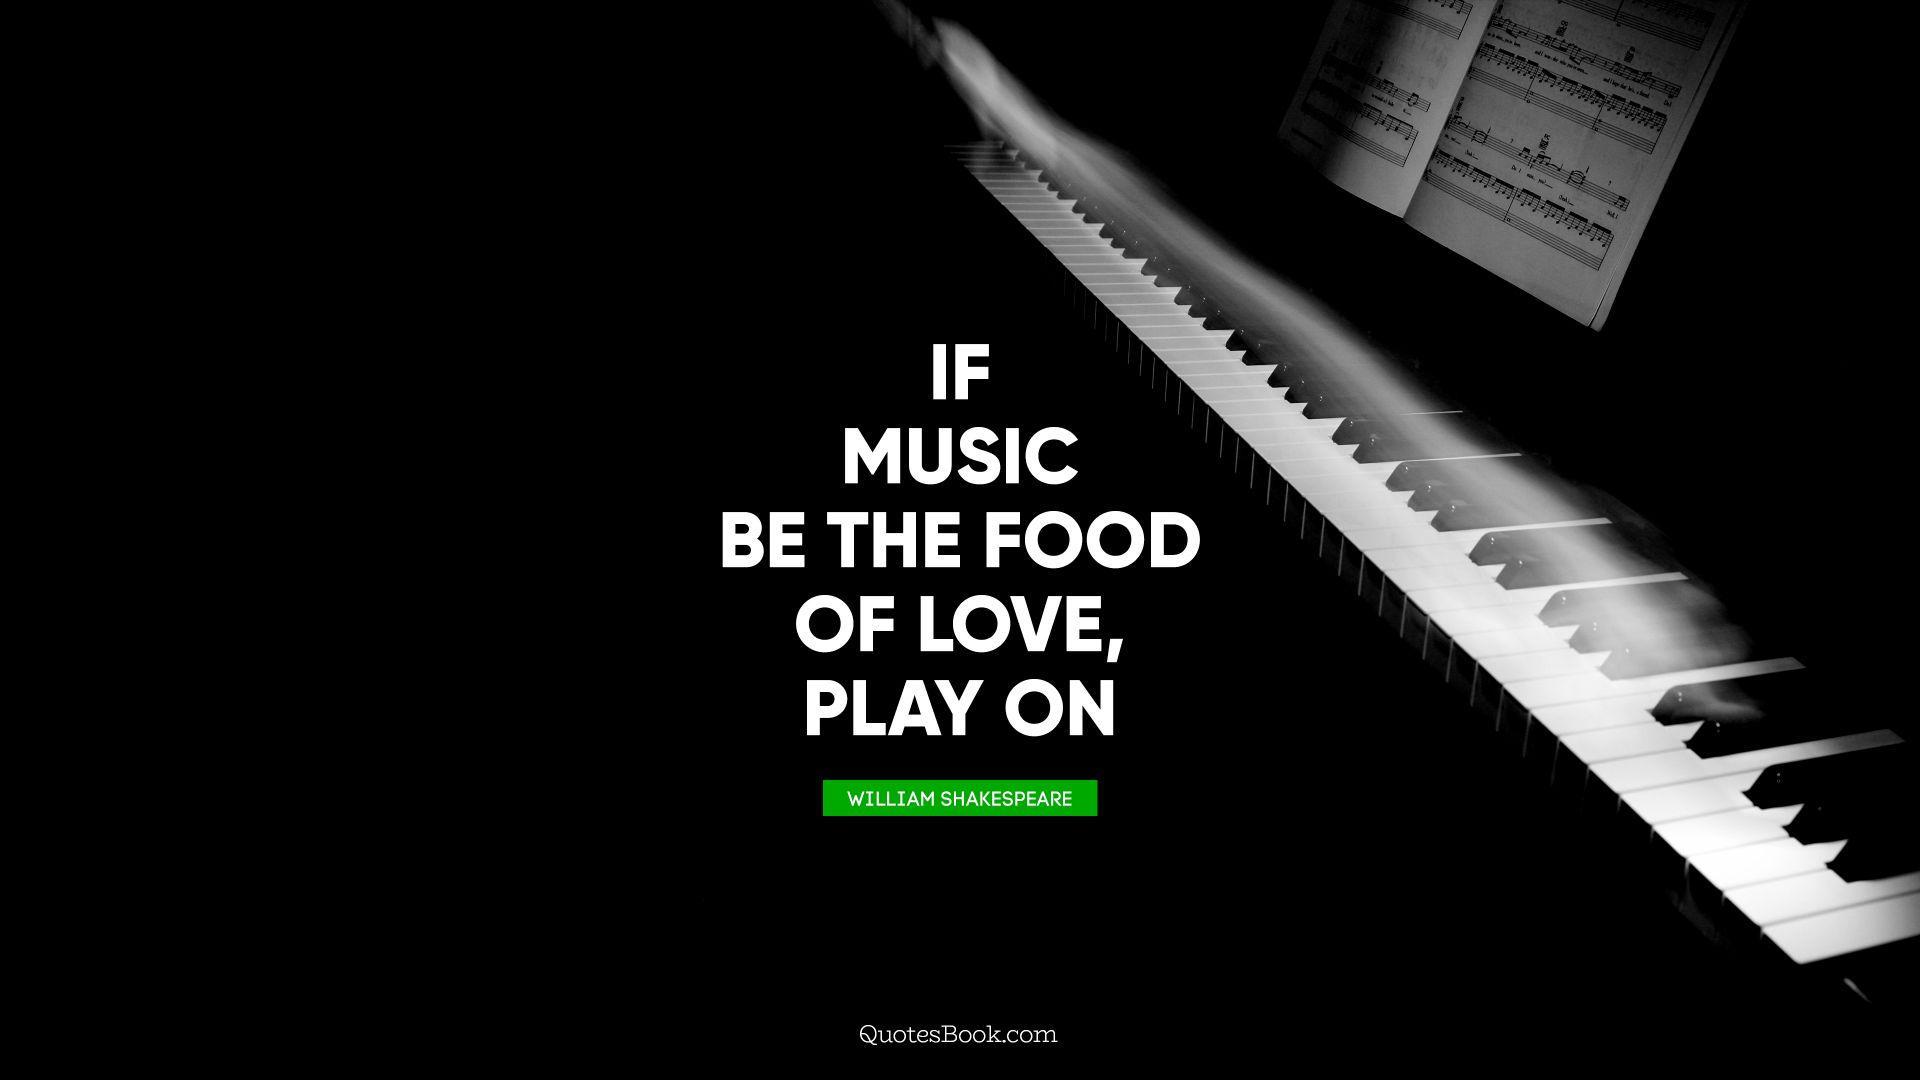 If music be the food of love, play on. - Quote by William Shakespeare